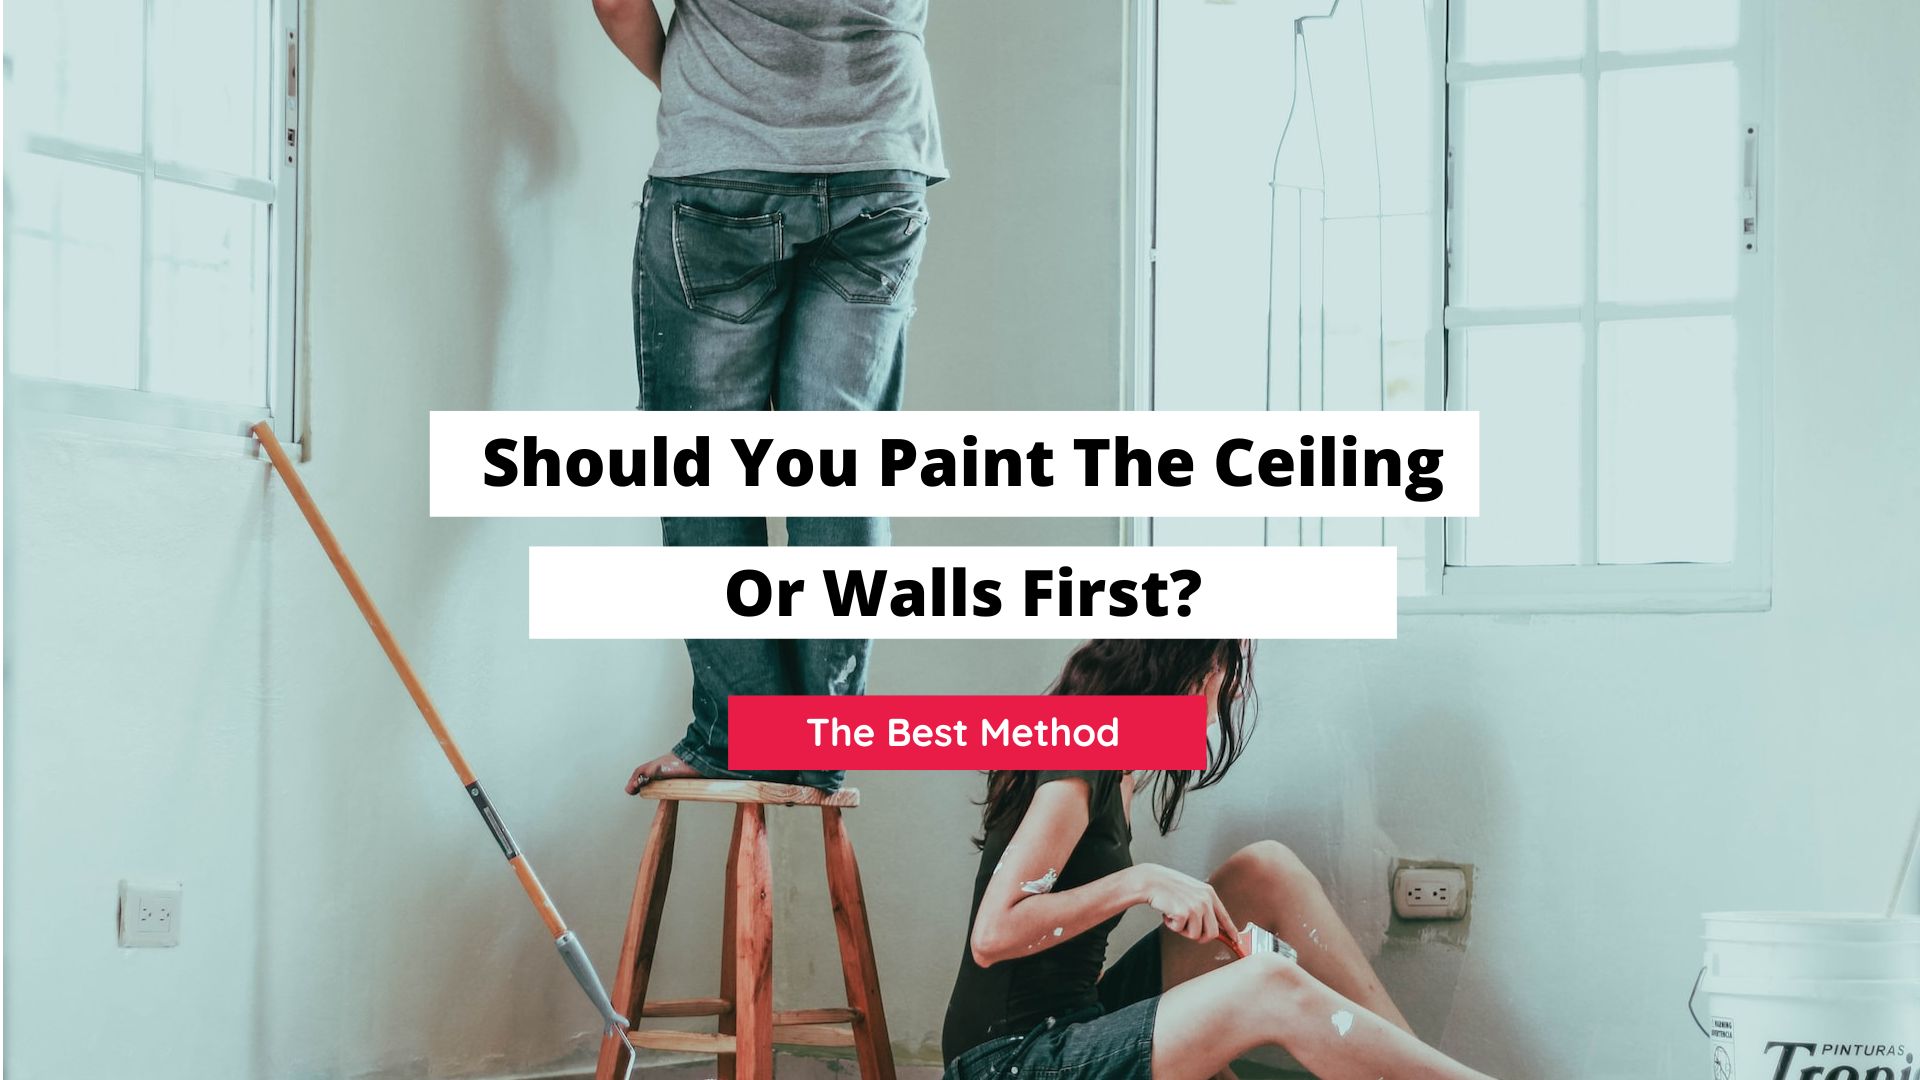 should you paint the walls or ceilings first